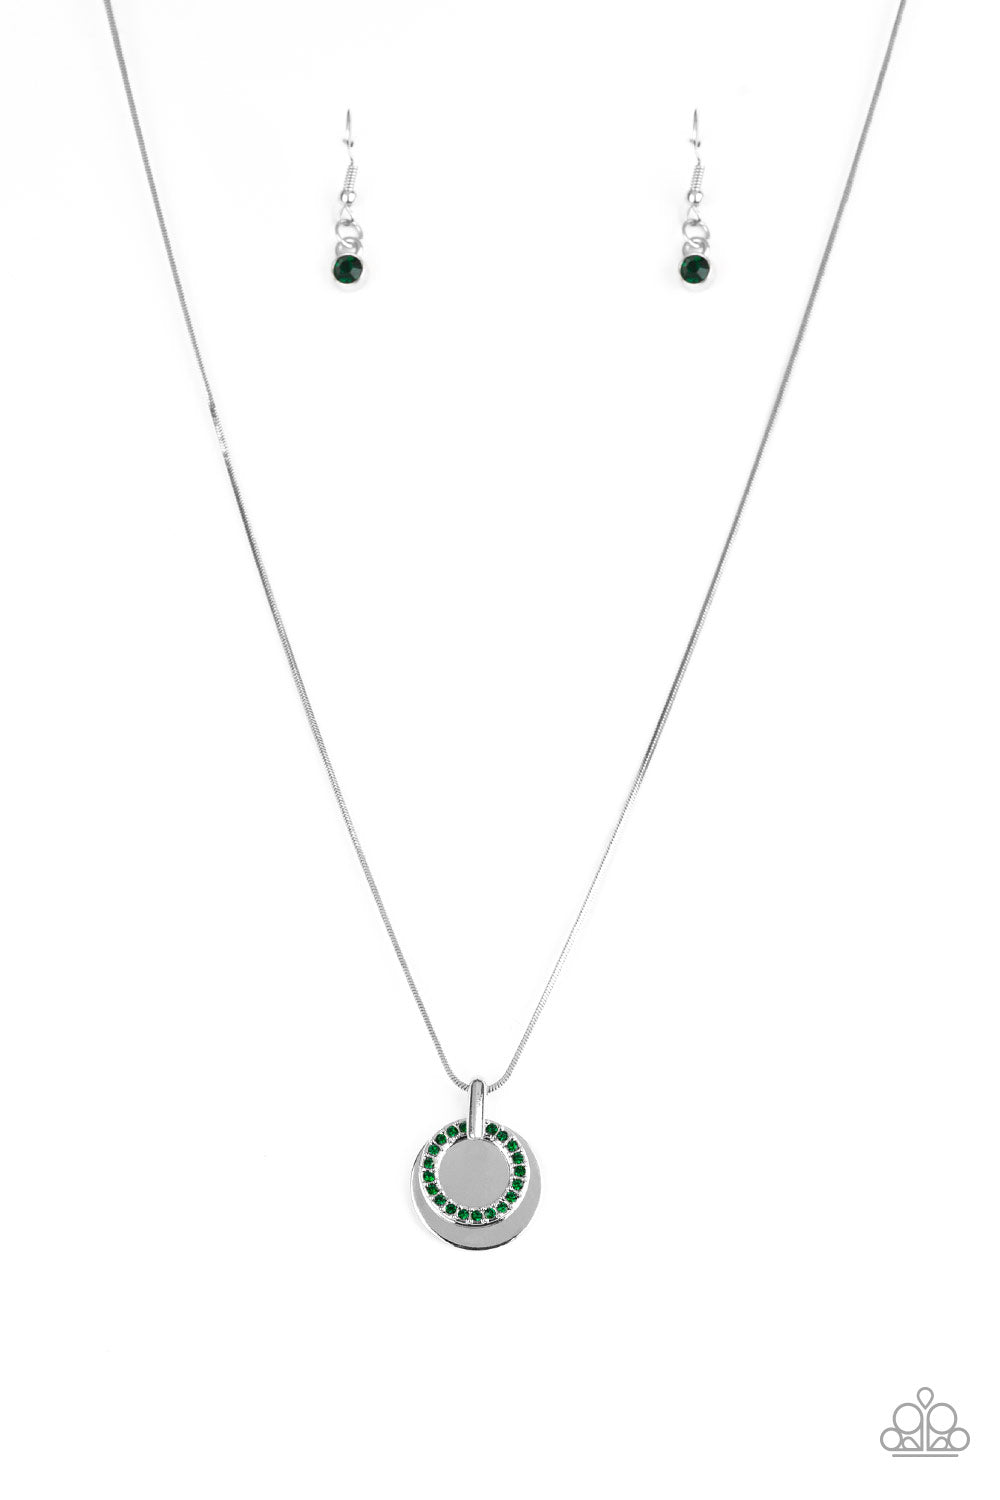 Front and CENTERED - Green Necklace